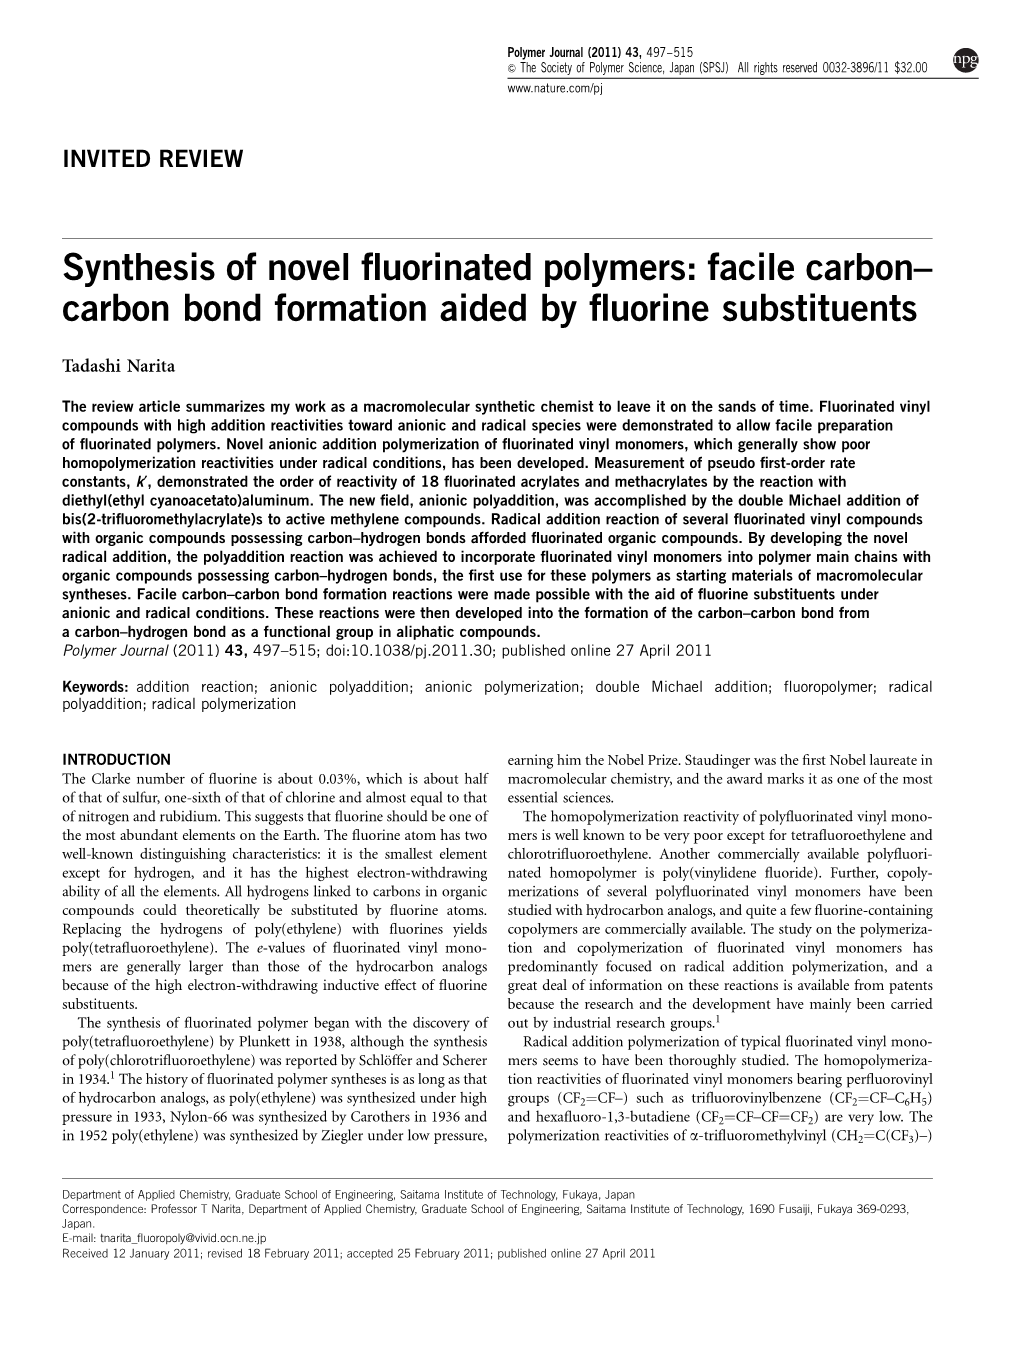 Synthesis of Novel Fluorinated Polymers: Facile Carbon